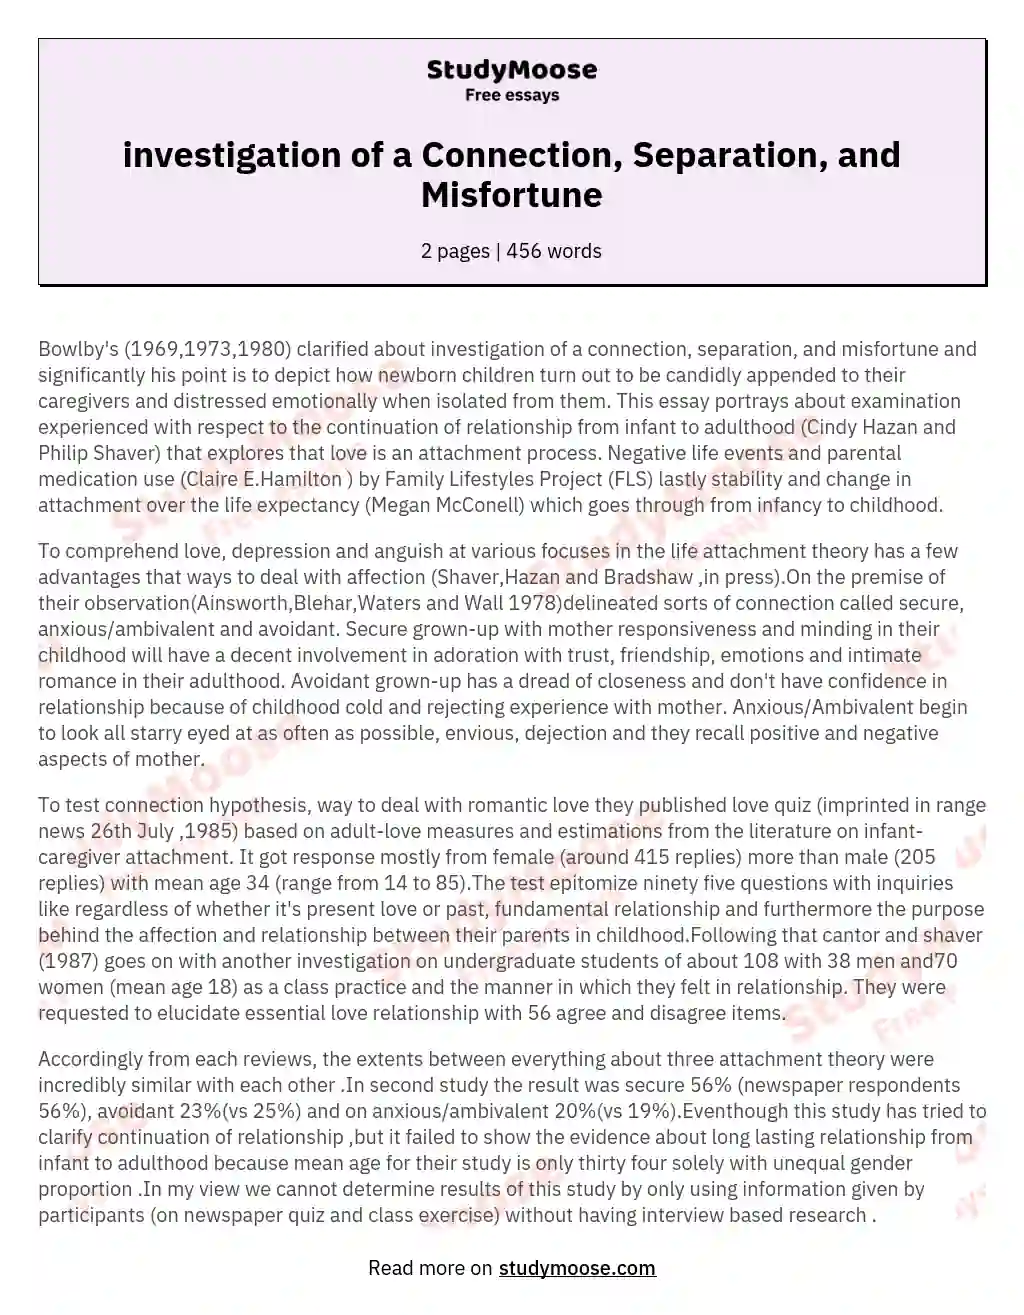 investigation of a Connection, Separation, and Misfortune essay